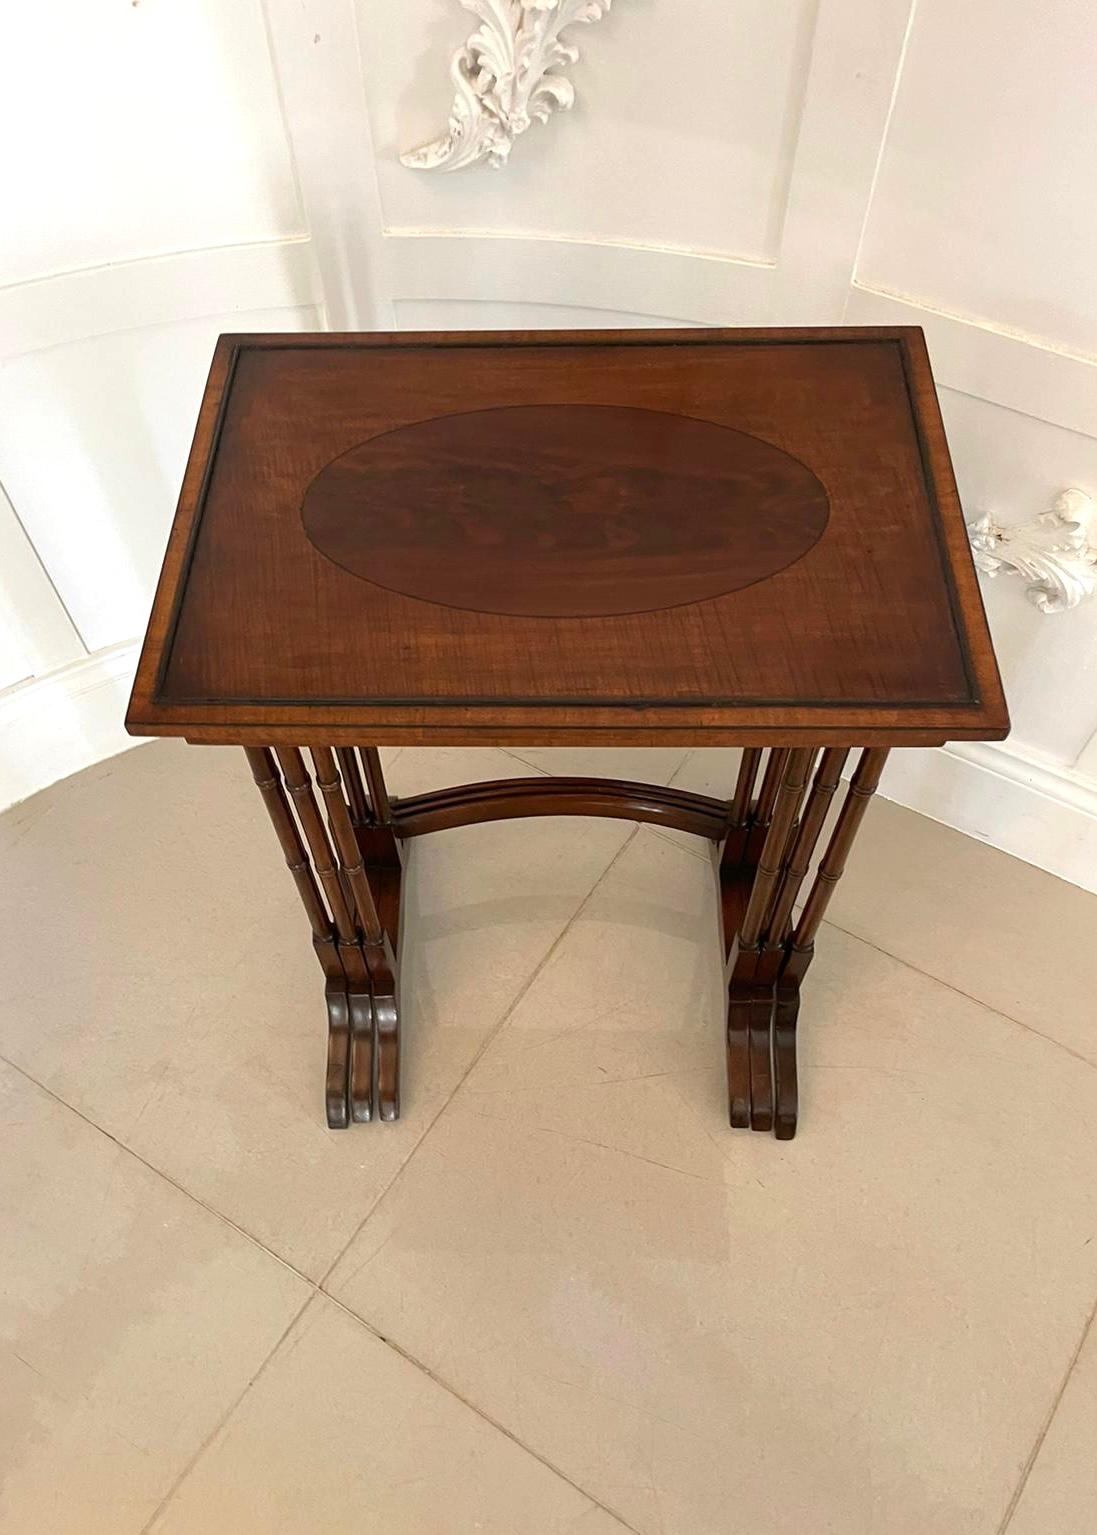 Other Antique Edwardian Quality Mahogany Nest of 3 Tables